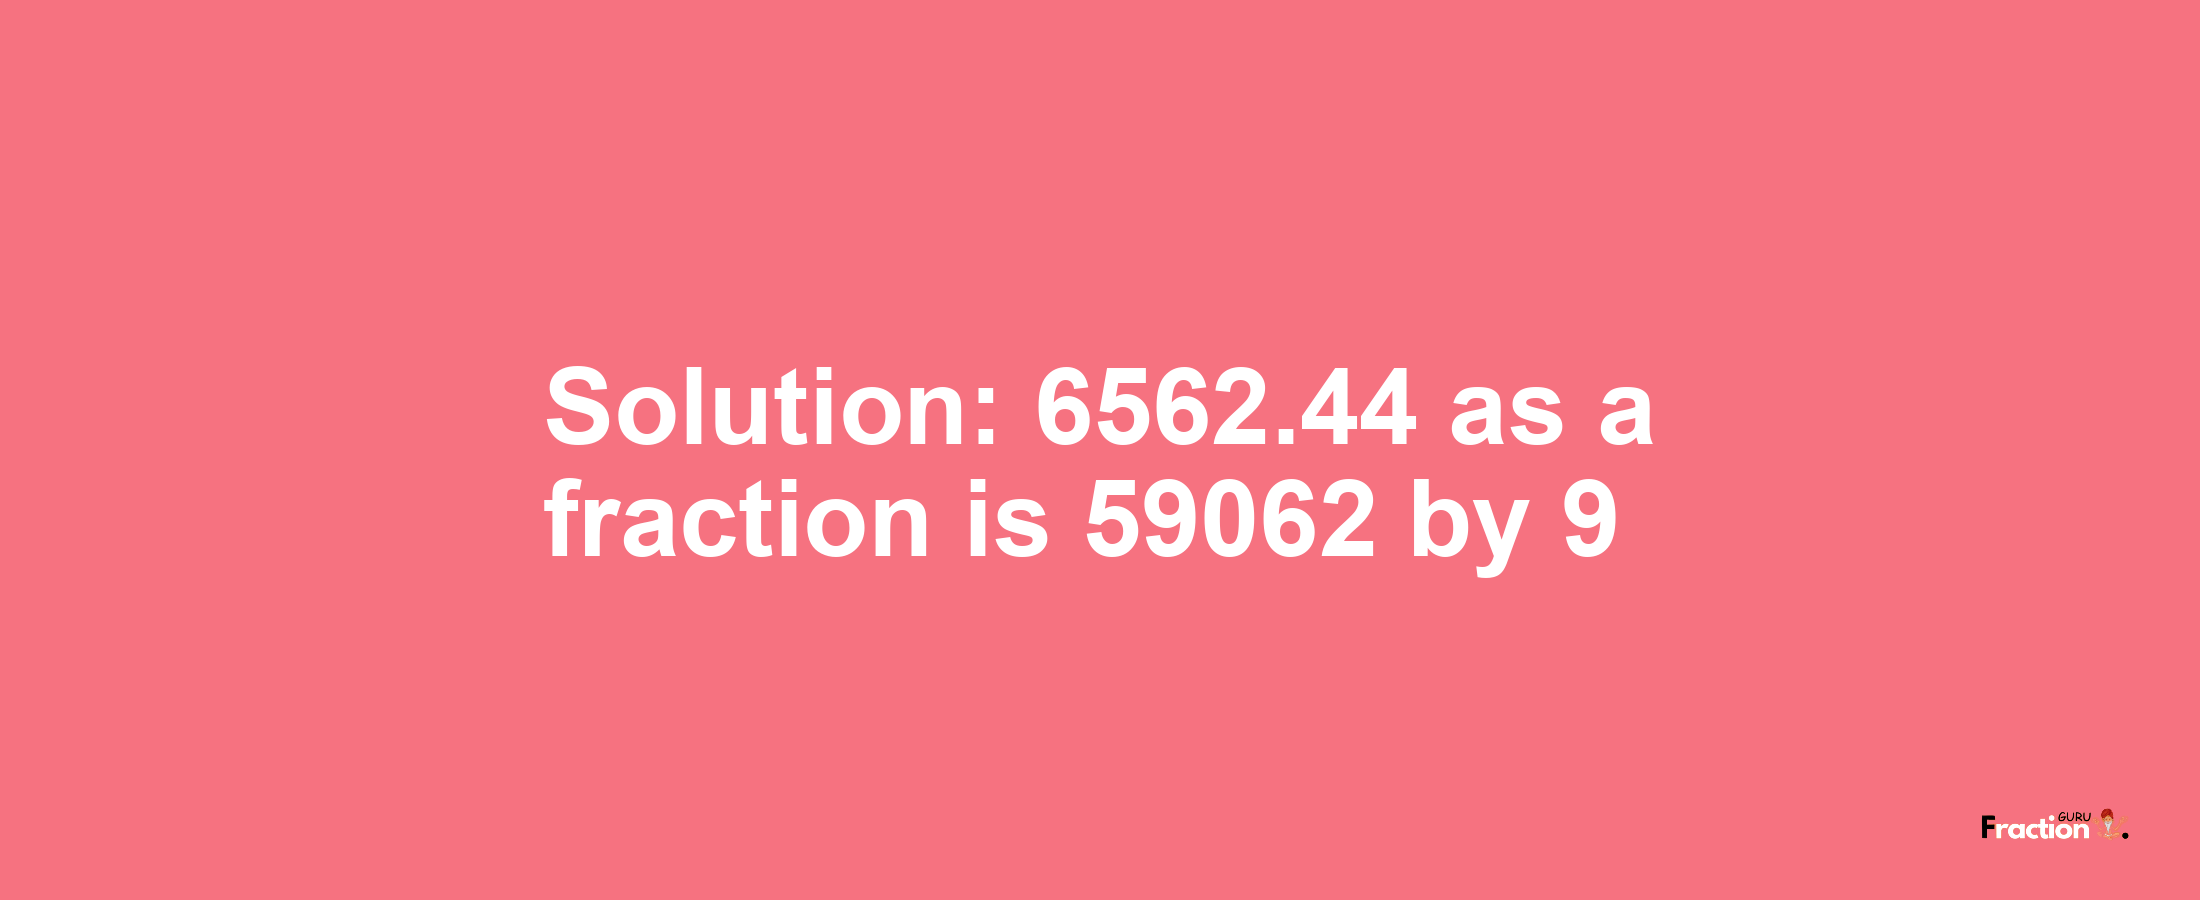 Solution:6562.44 as a fraction is 59062/9